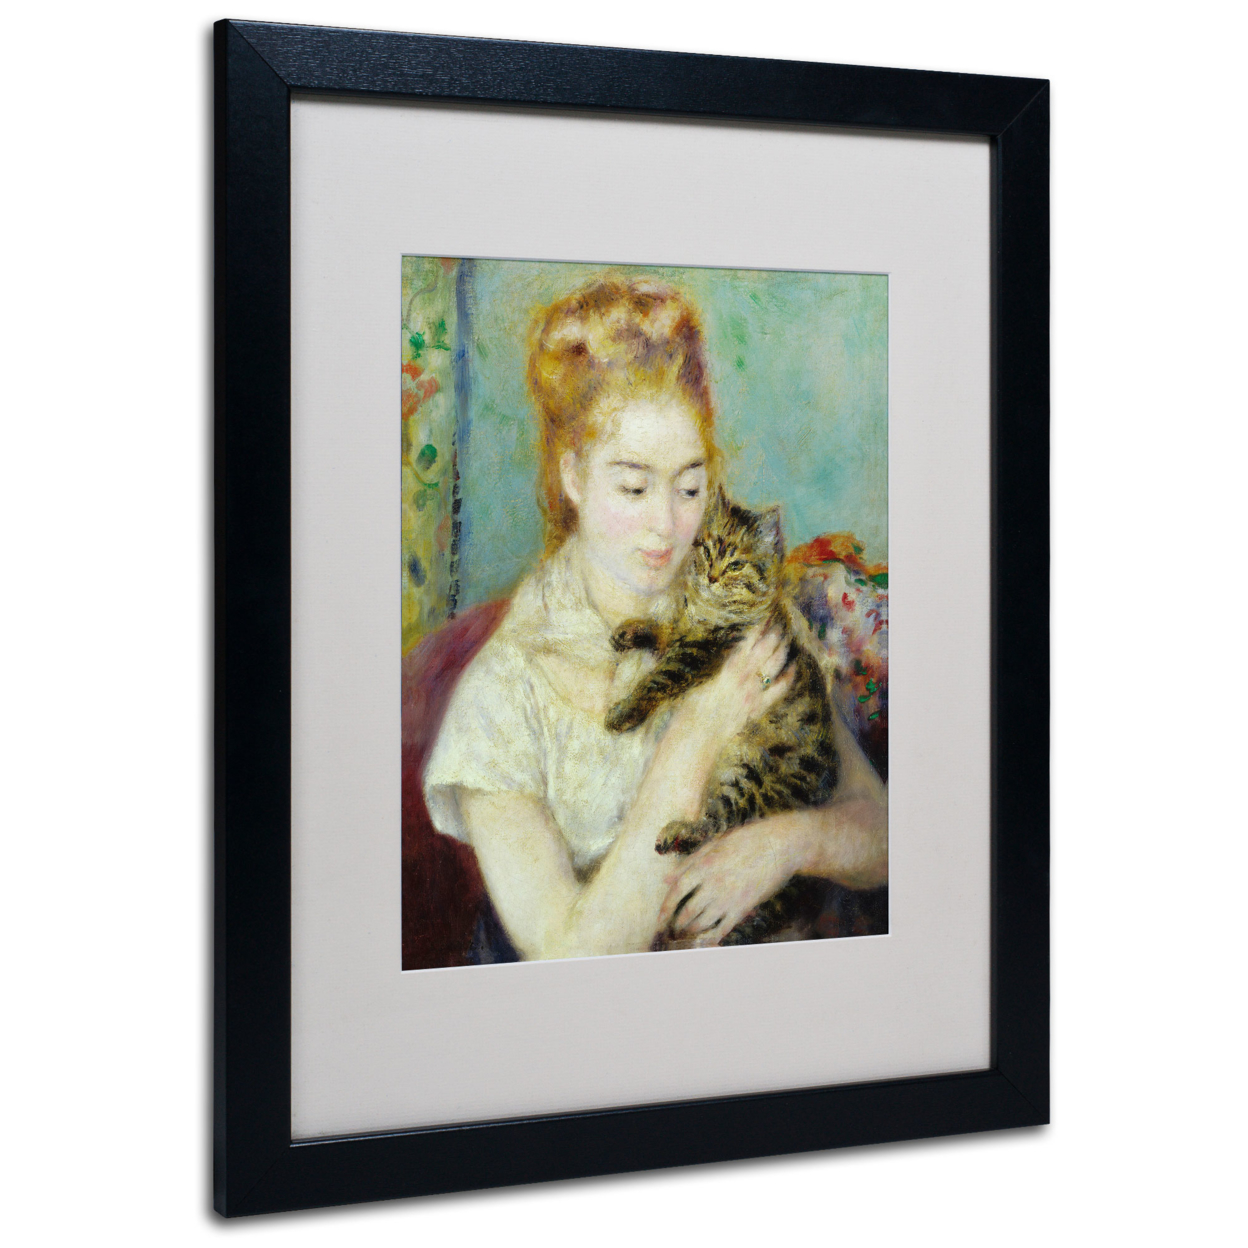 Pierre Renoir 'Woman With A Cat 1875' Black Wooden Framed Art 18 X 22 Inches